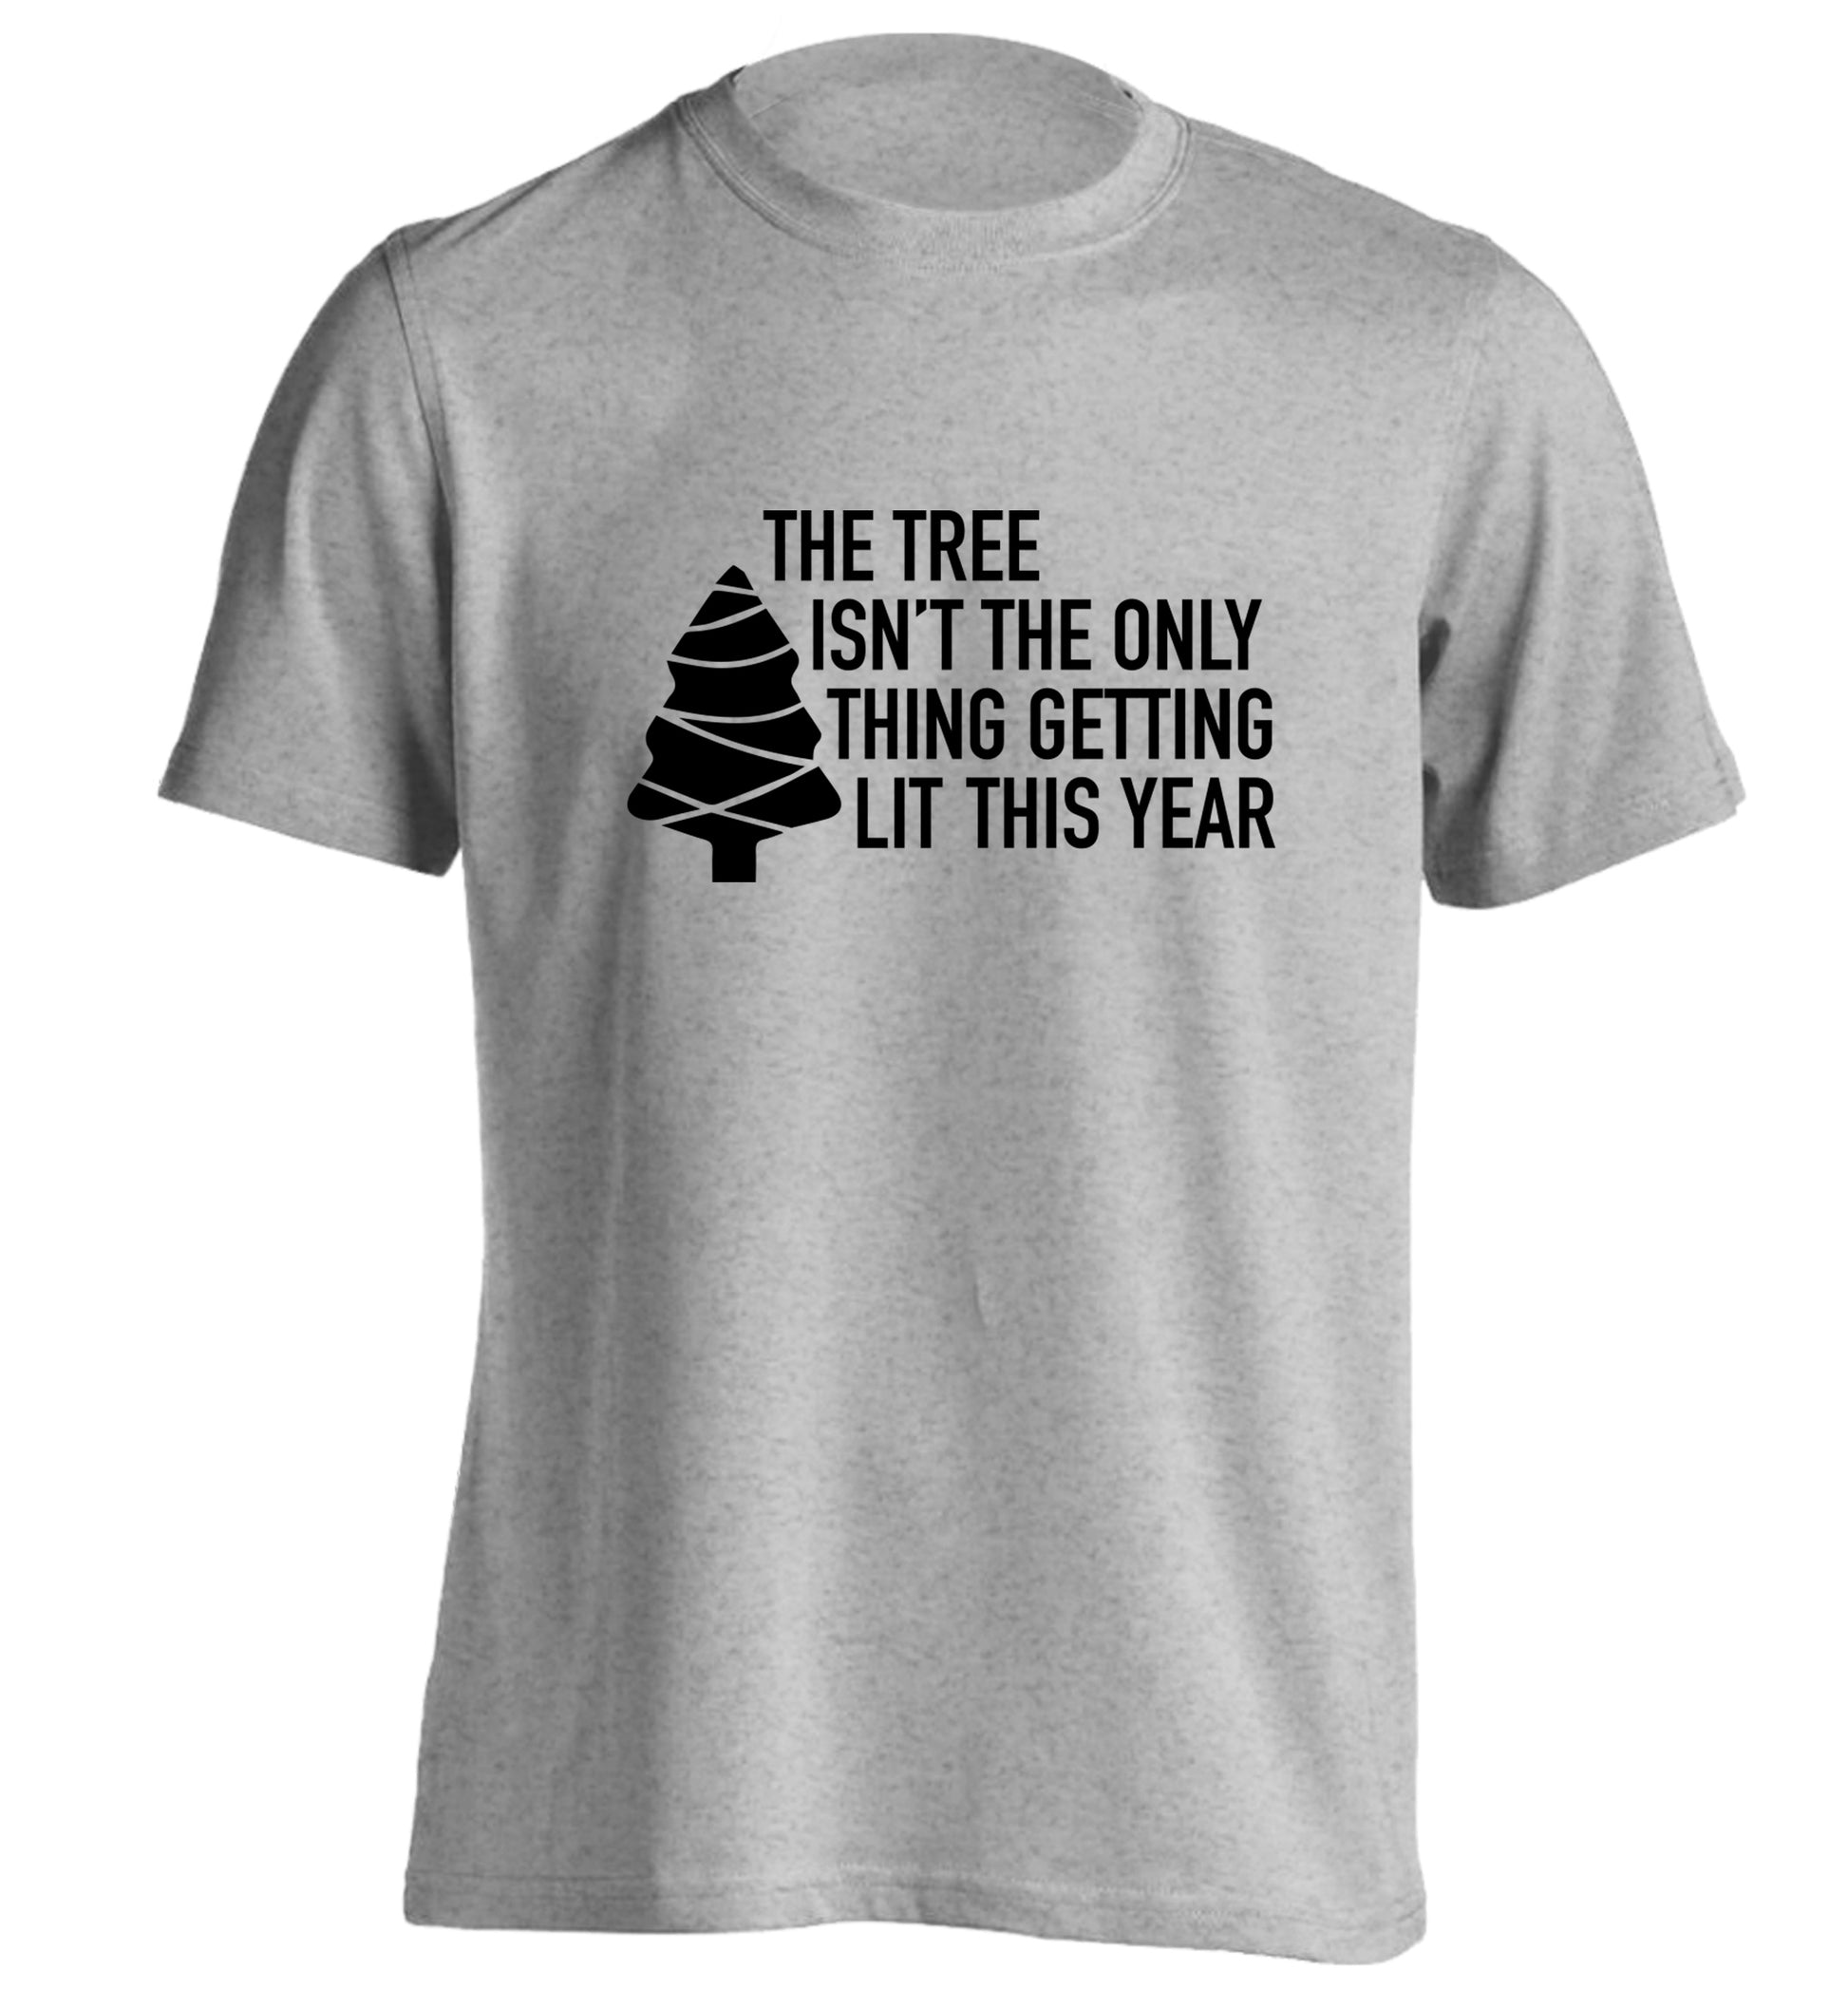 The tree isn't the only thing getting lit this year adults unisex grey Tshirt 2XL